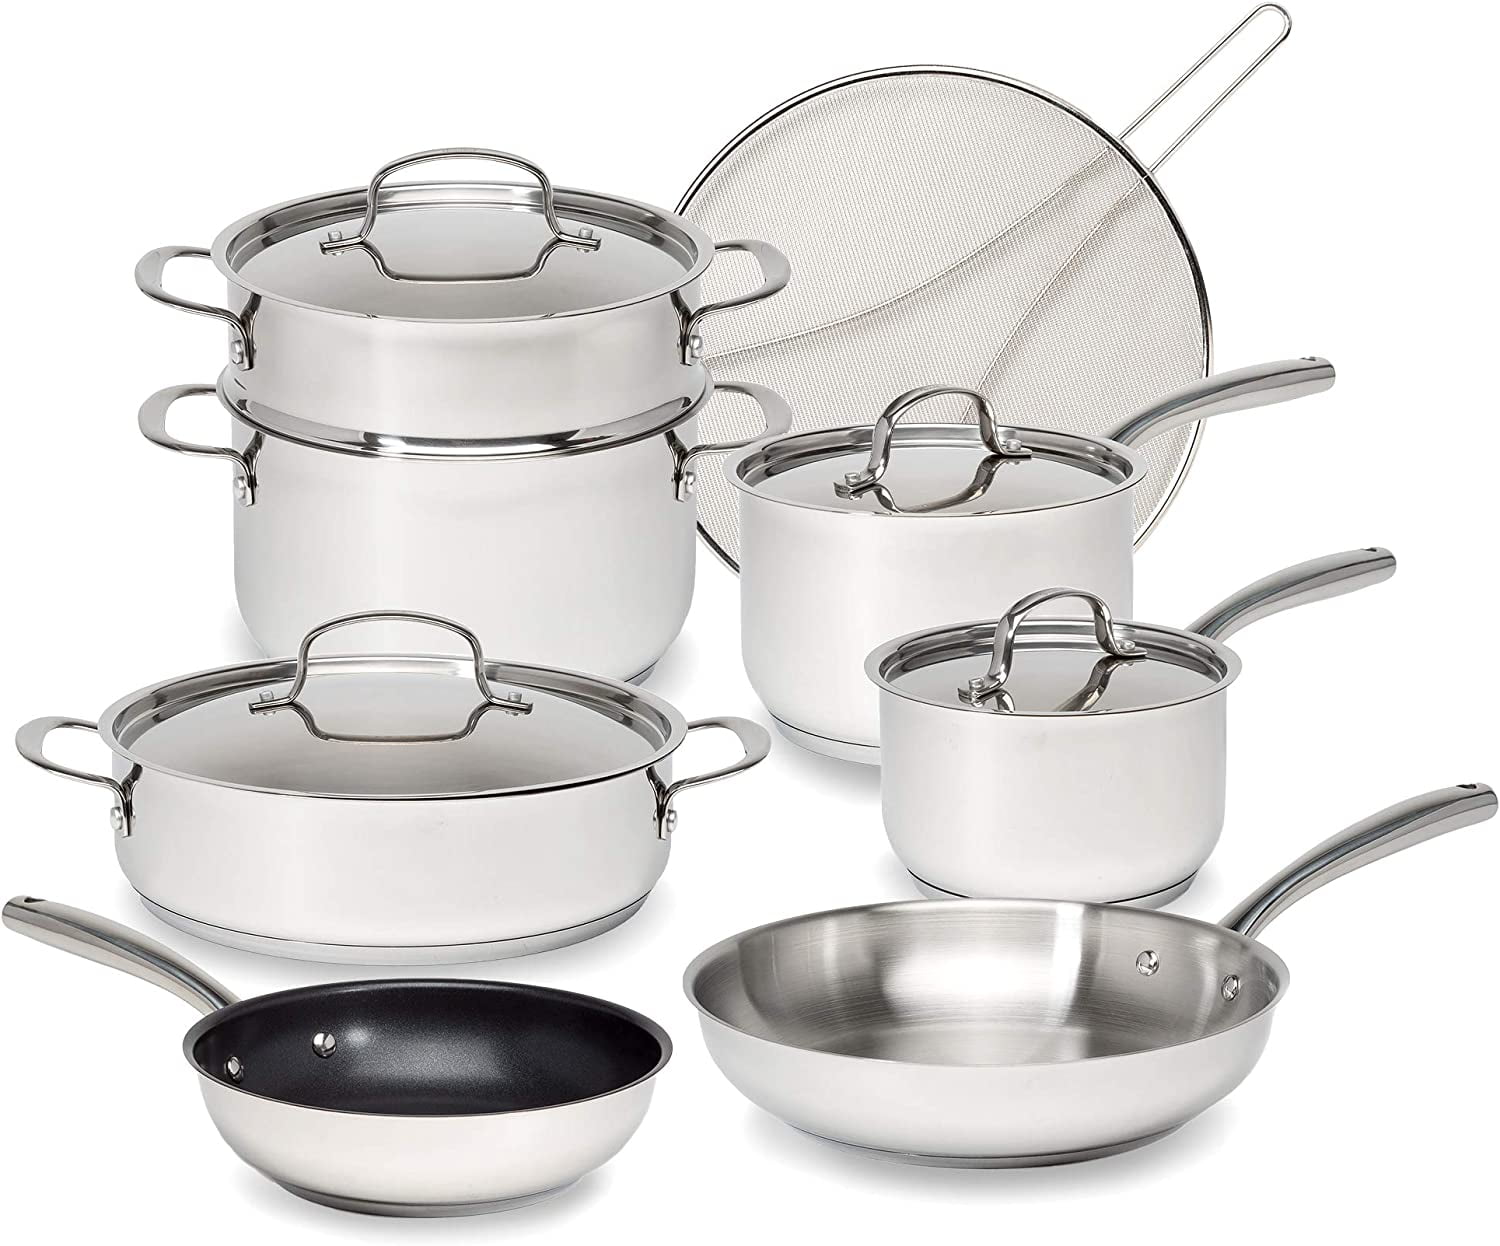 Goodful 12-Piece Classic Stainless Steel Cookware Set with Tri-Ply Base for  Even Heating, Durable, Impact Bonded Pots and Pans, Dishwasher Safe  Includes Non Stick Frying Pan, Chrome 